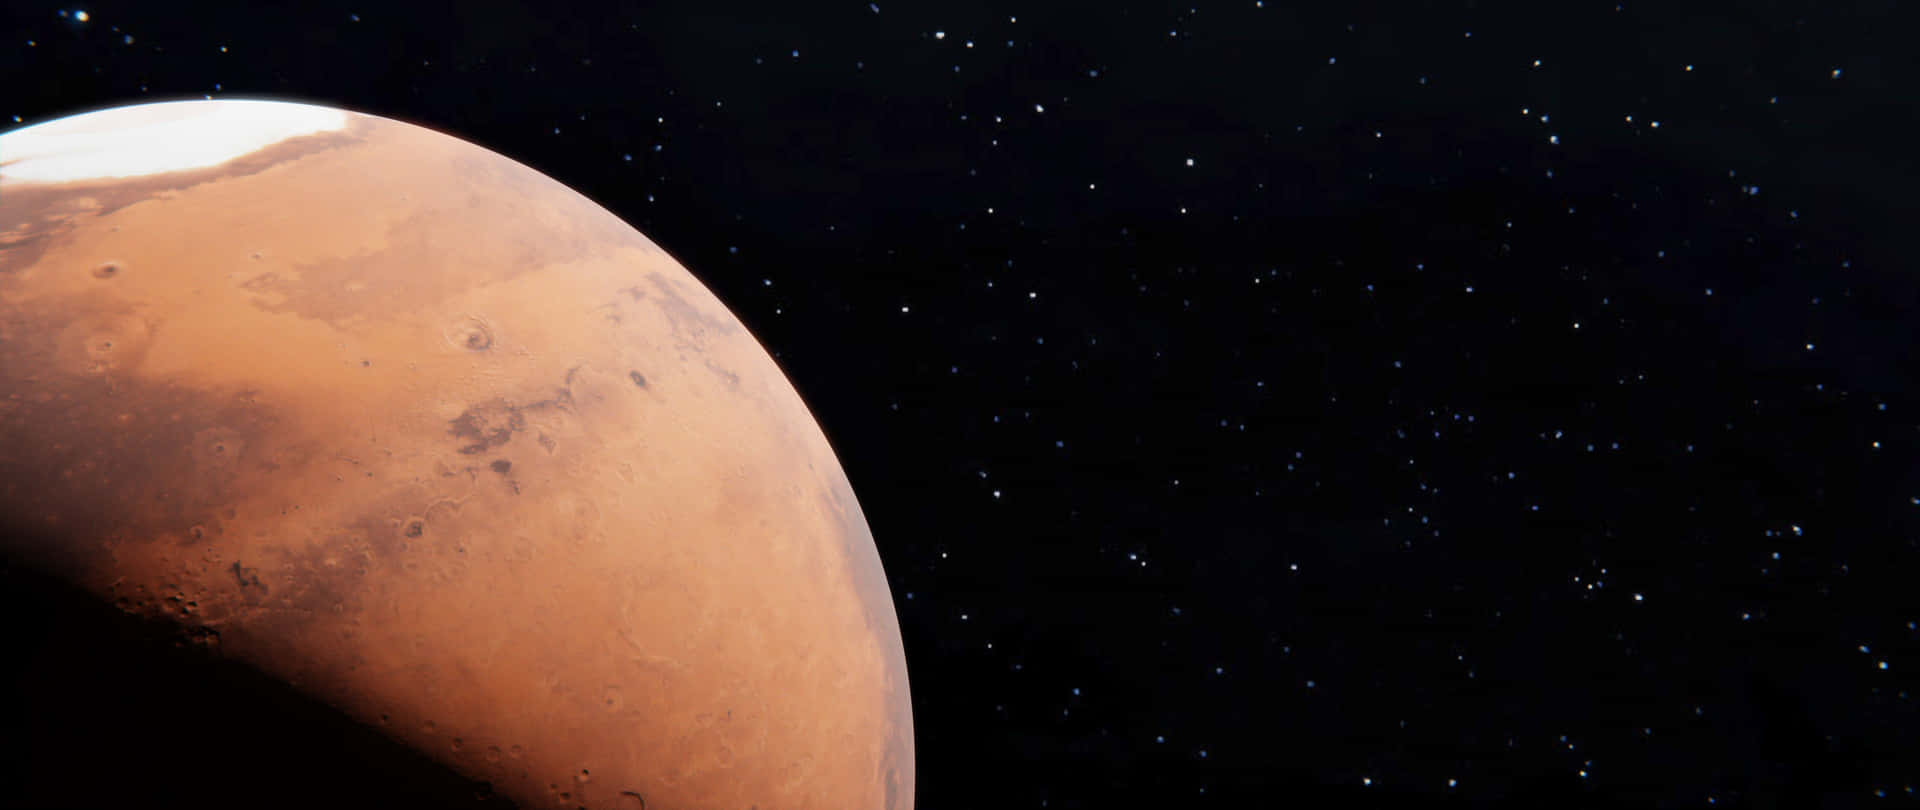 An incredible view of the desolate planet Mars Wallpaper